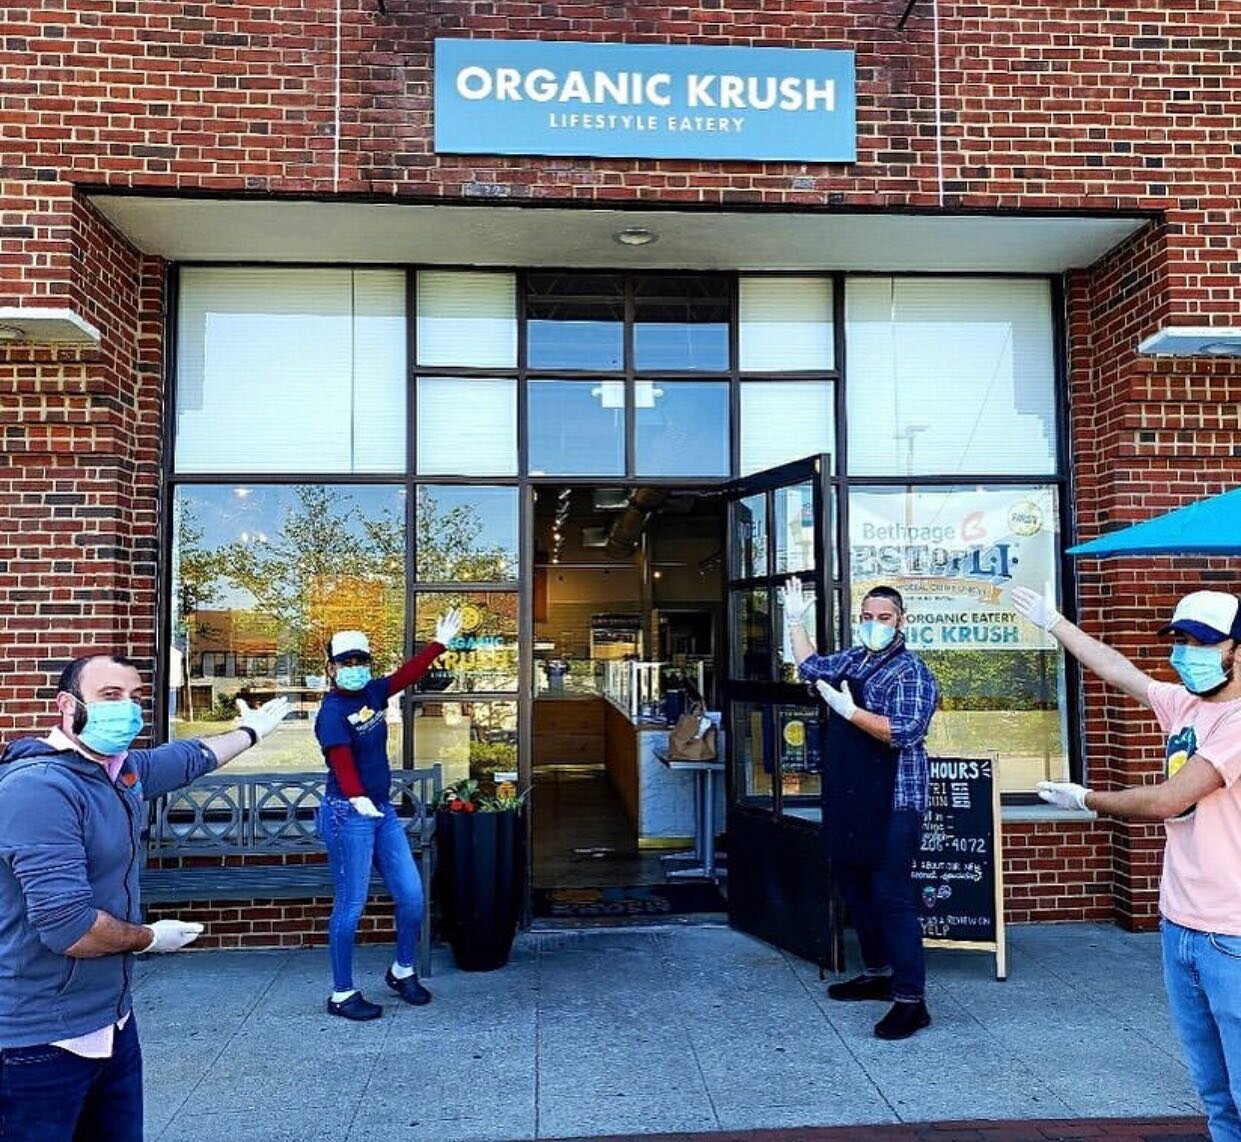 Enjoy a healthy meal served in the sunshine from @organickrush ! 🌞 #outdoordininglongisland